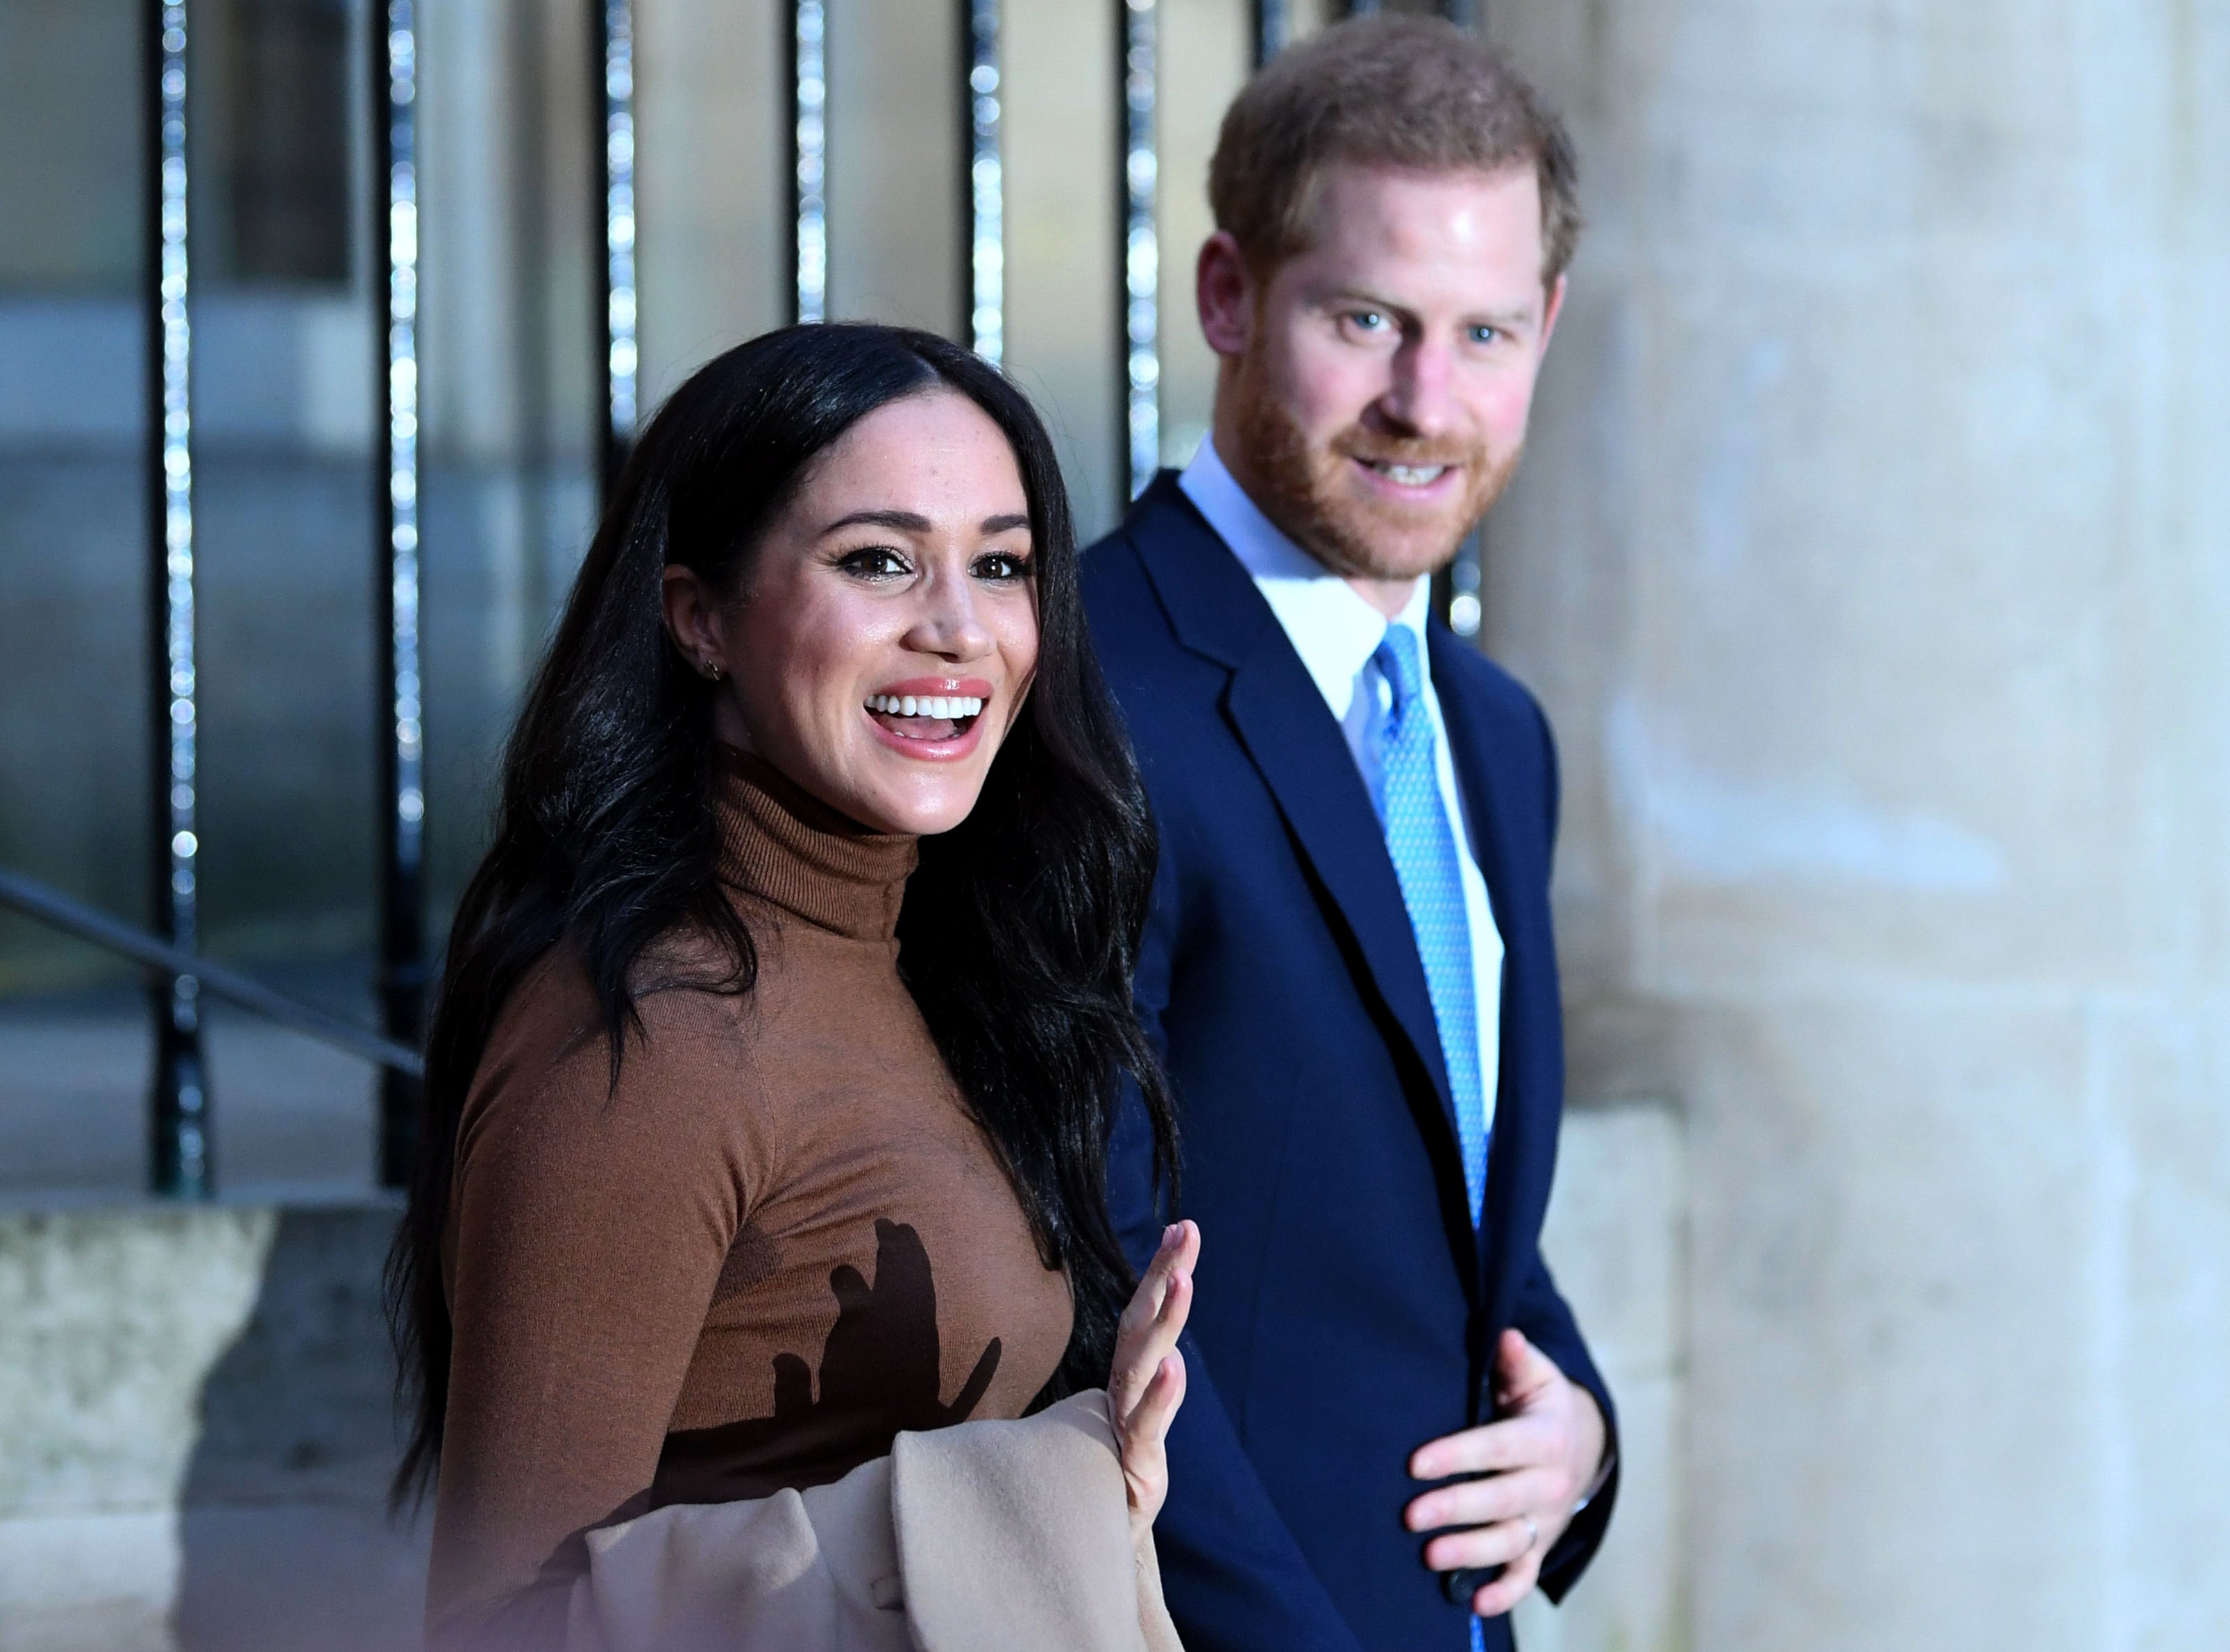 The uke and Duchess of Sussex leaving after their visit to Canada House, central London. The Duchess has unveiled her first Spotify series – a podcast about female stereotypes, in which she vows to investigate “labels that try to hold women back”. Archetypes will launch this summer, hosted by Meghan who will speak to historians, experts and woman who have experienced being typecast. Issue date: Thursday March 24, 2022.